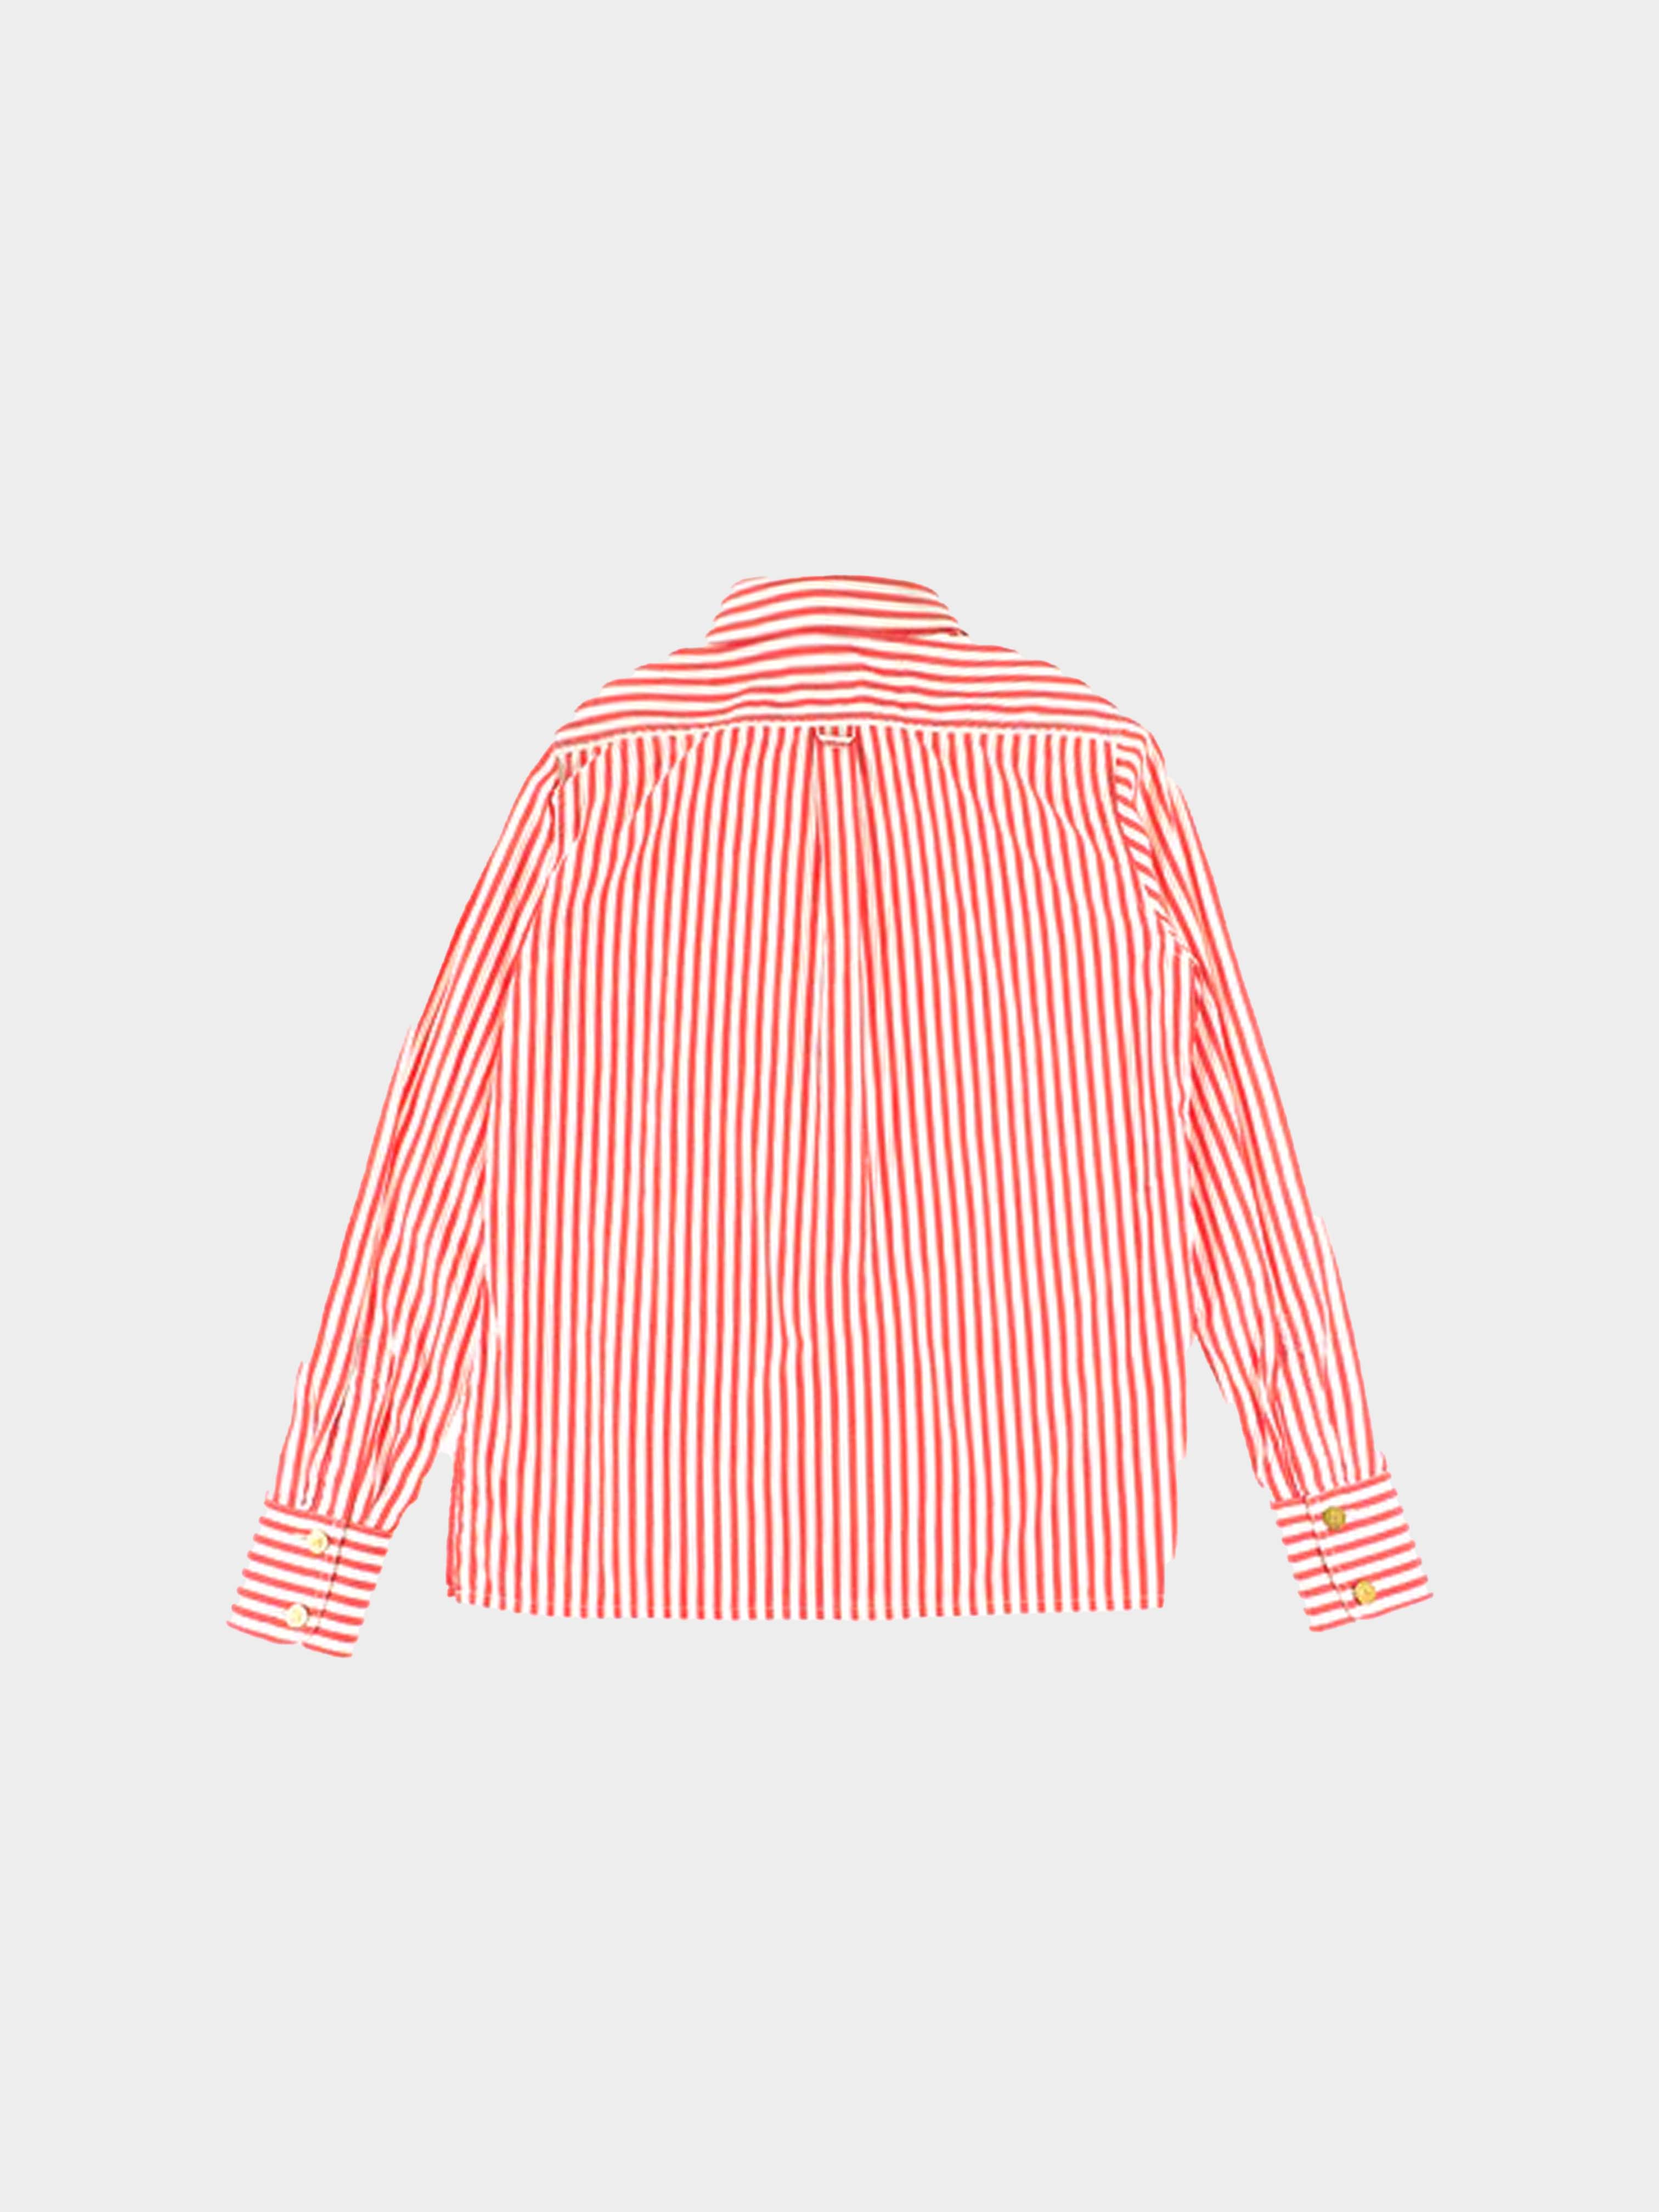 Rare 1990s Chanel Striped Button Up Dress Shirt at 1stDibs